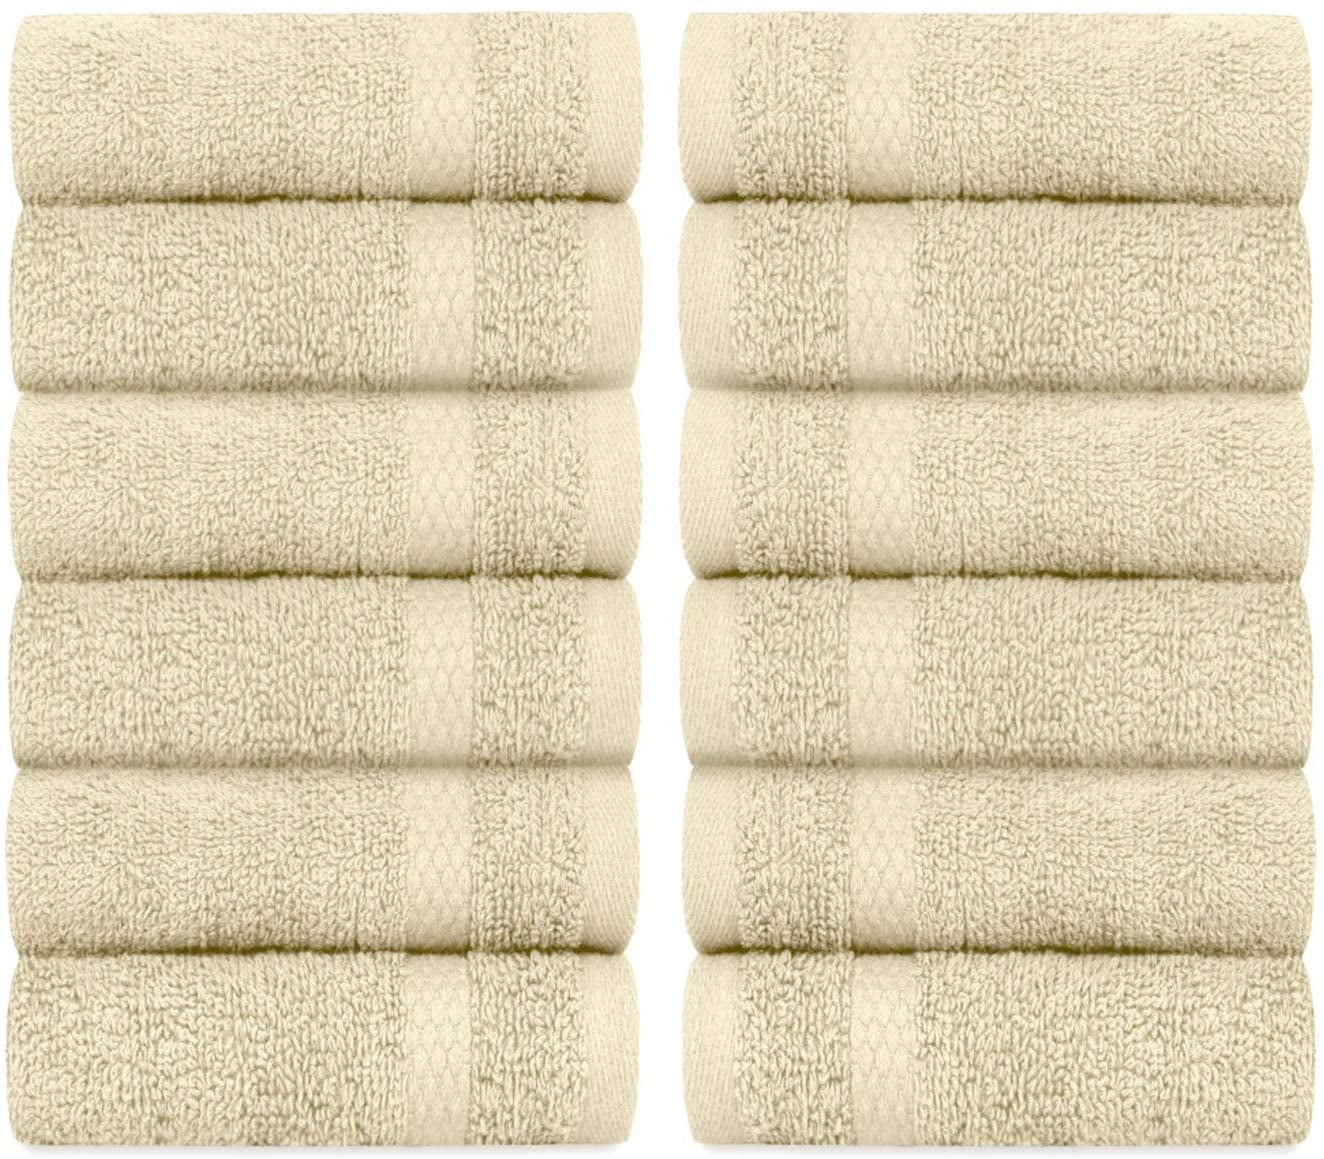 Beige White Classic Luxury Cotton Washcloths 12 Pack Large Hotel Spa Bathroom Face Towel